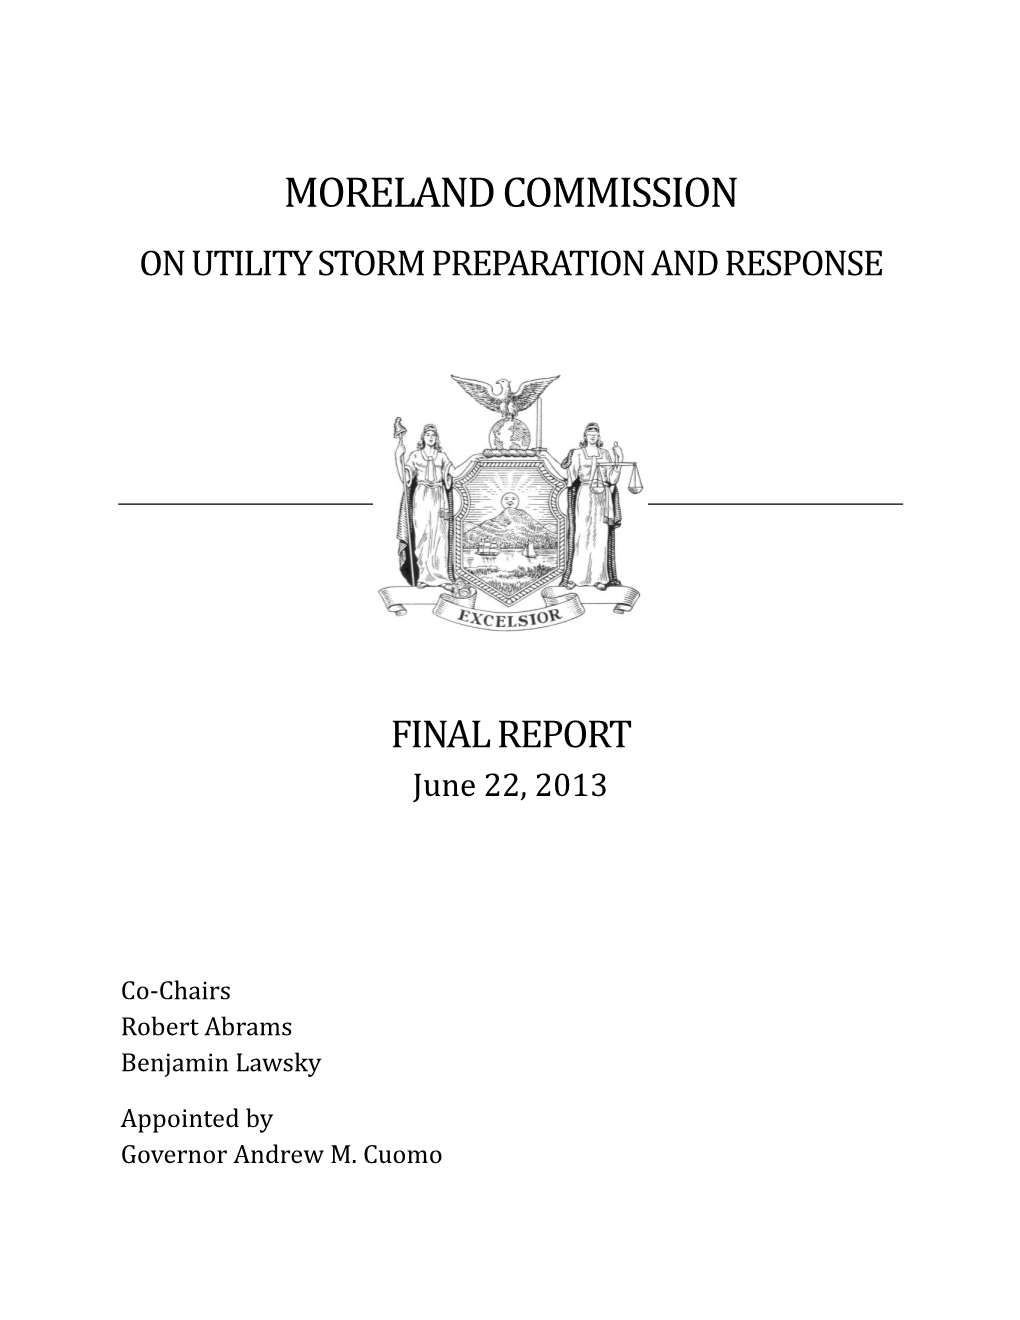 Moreland Commission on Utility Storm Preparation and Response